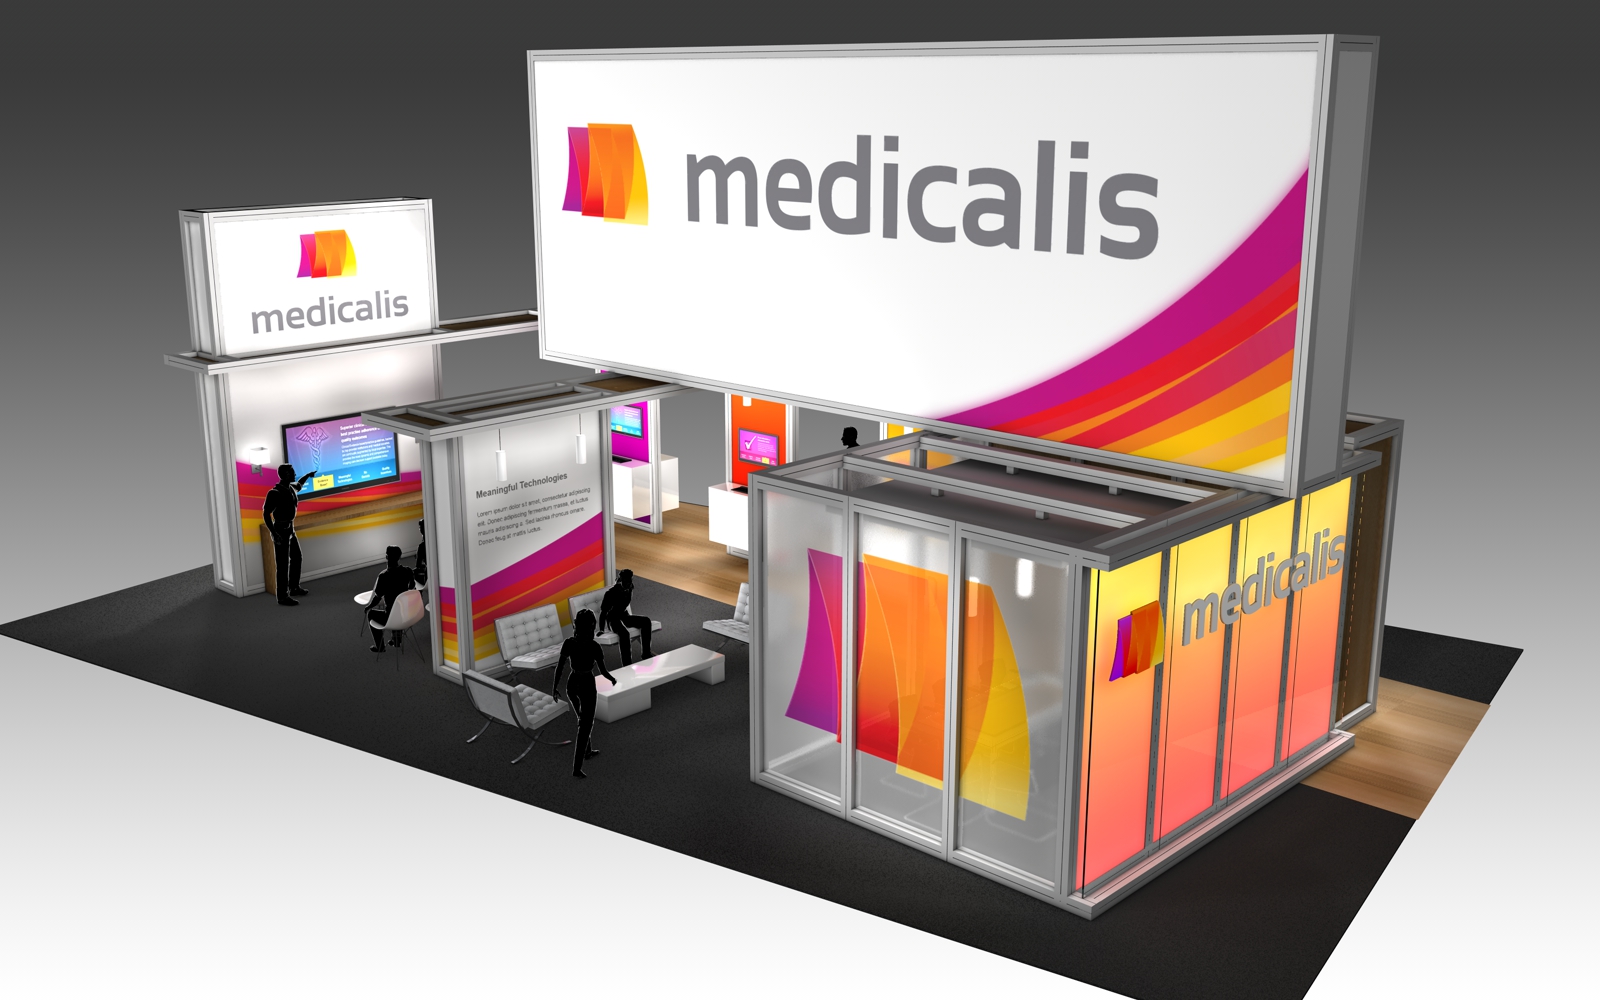 30' x 50' rental exhibit with vibrant graphics and large corporate branding for a U.S. radiology trade show